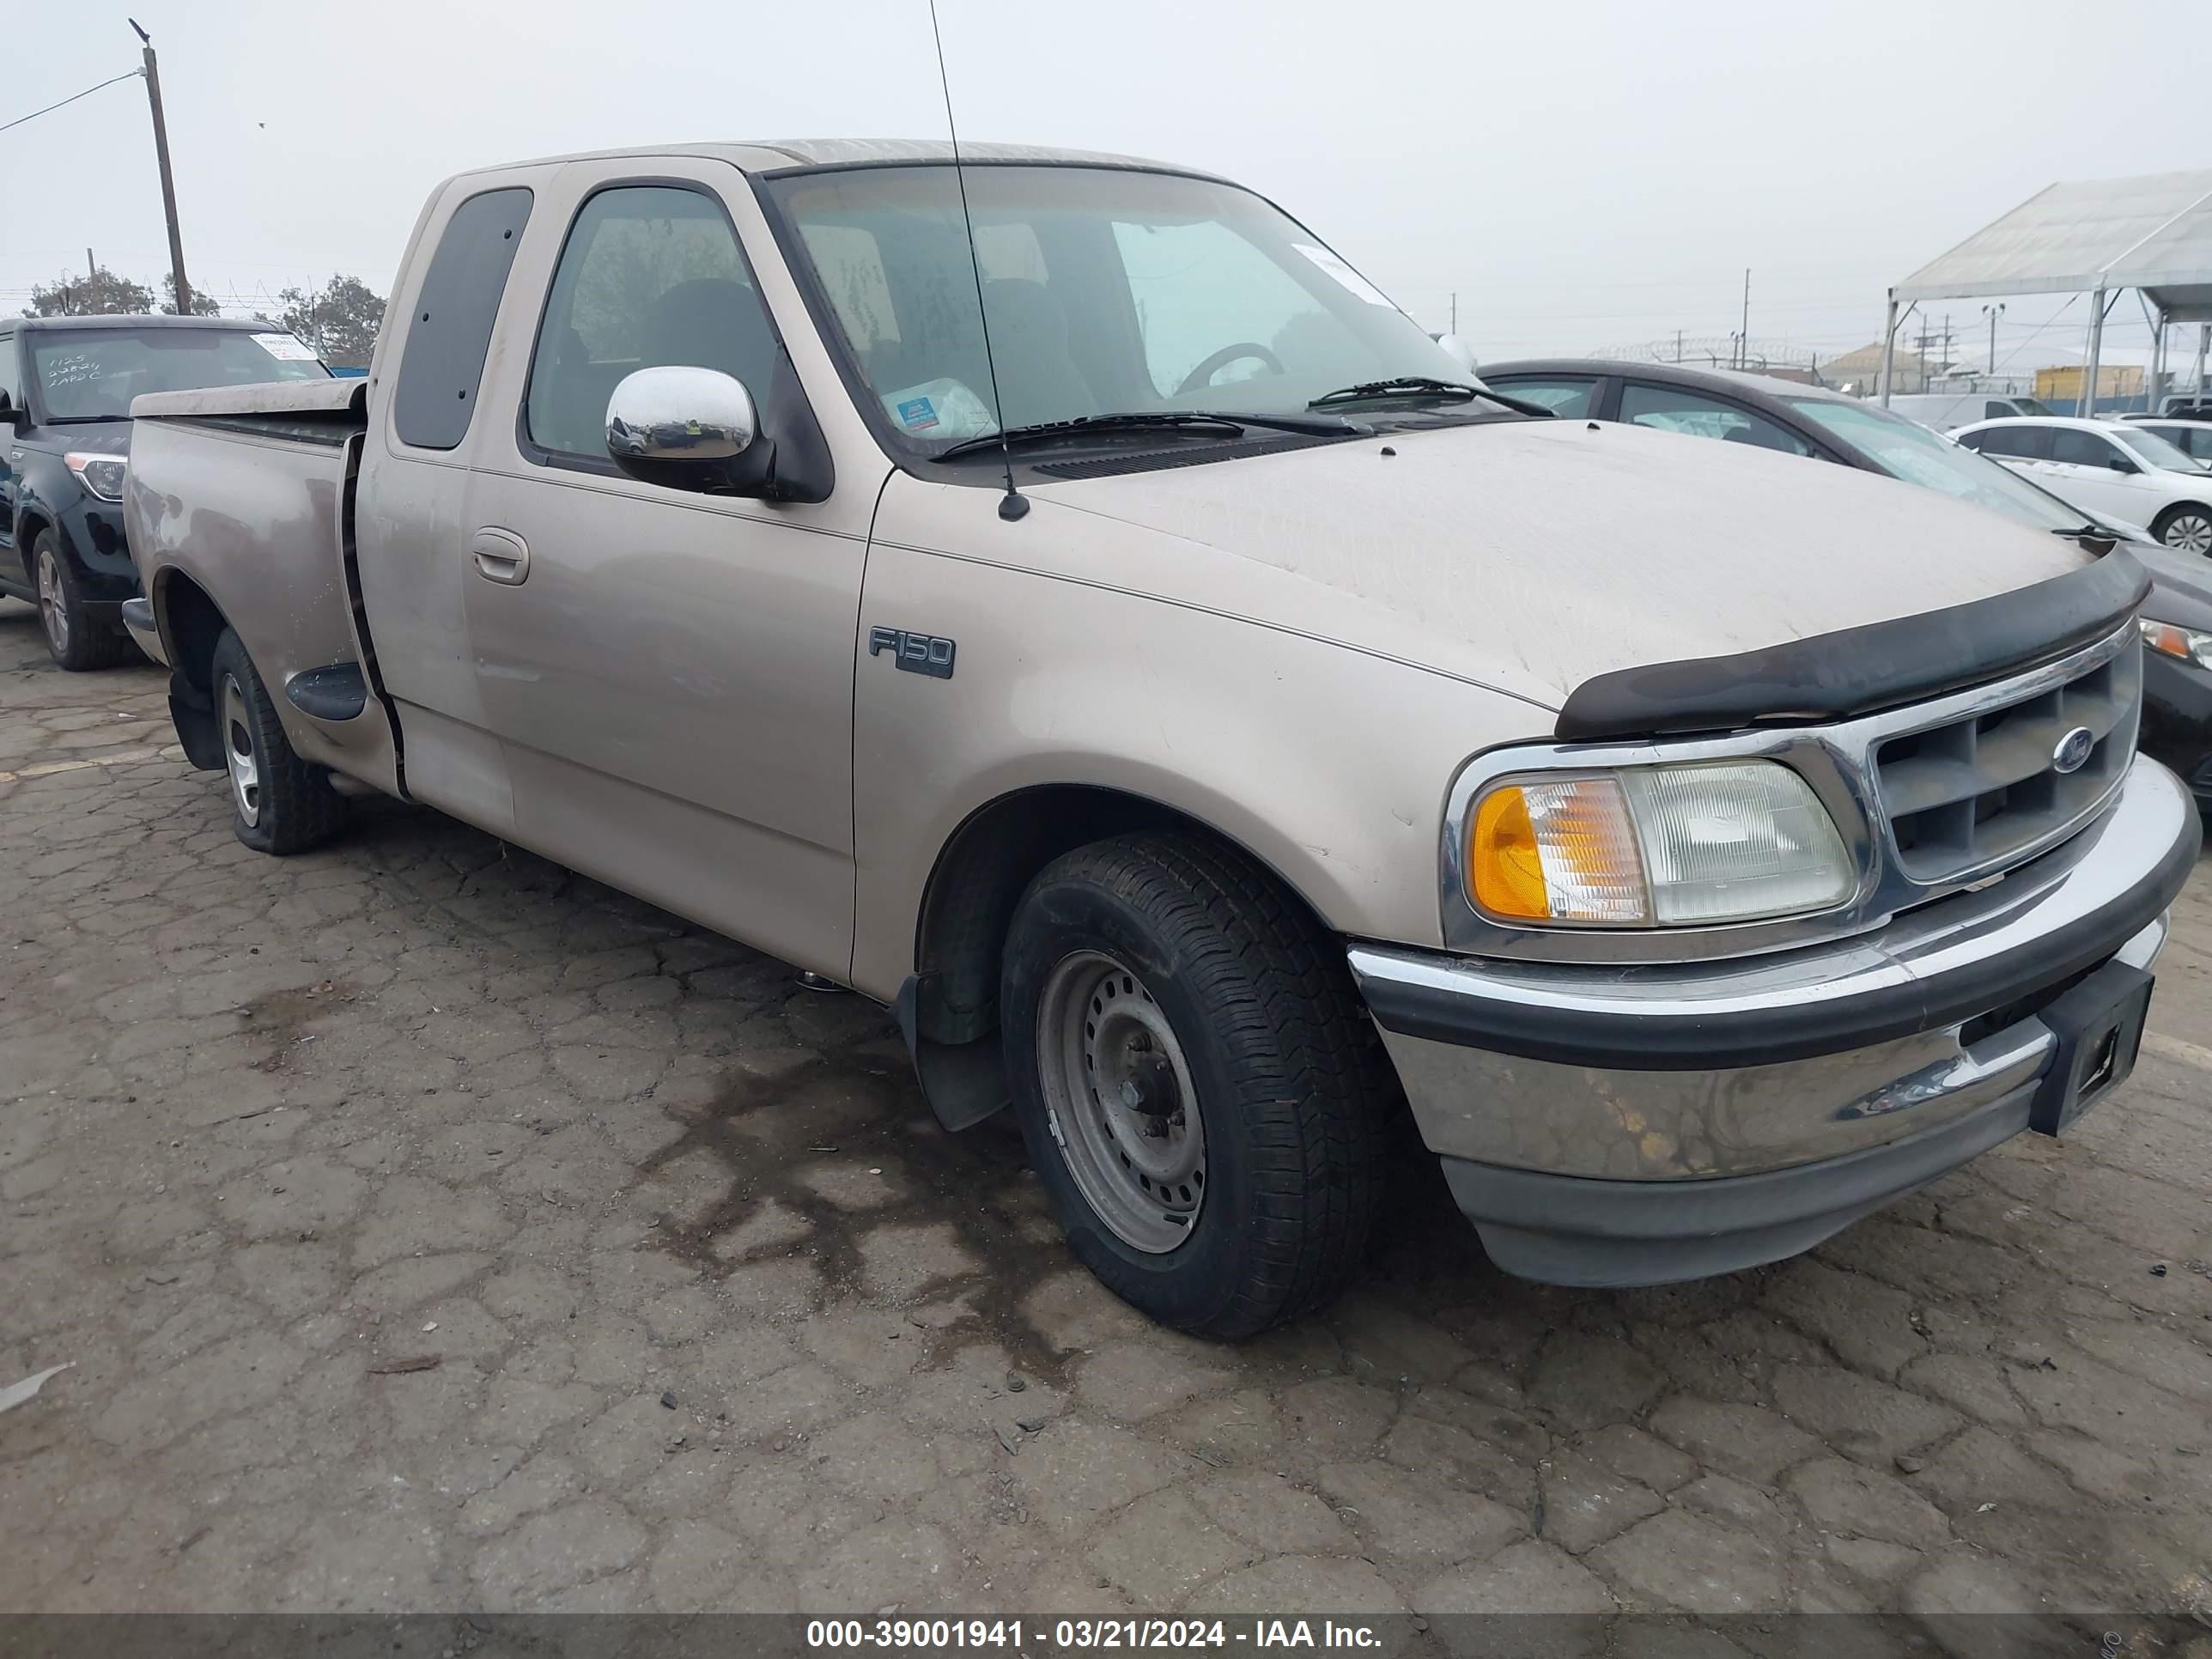 vin: 1FTDX0725VKB90734 1FTDX0725VKB90734 1997 ford f-150 4200 for Sale in 91605, 7245 Laurel Canyon Blvd, Los Angeles, California, USA